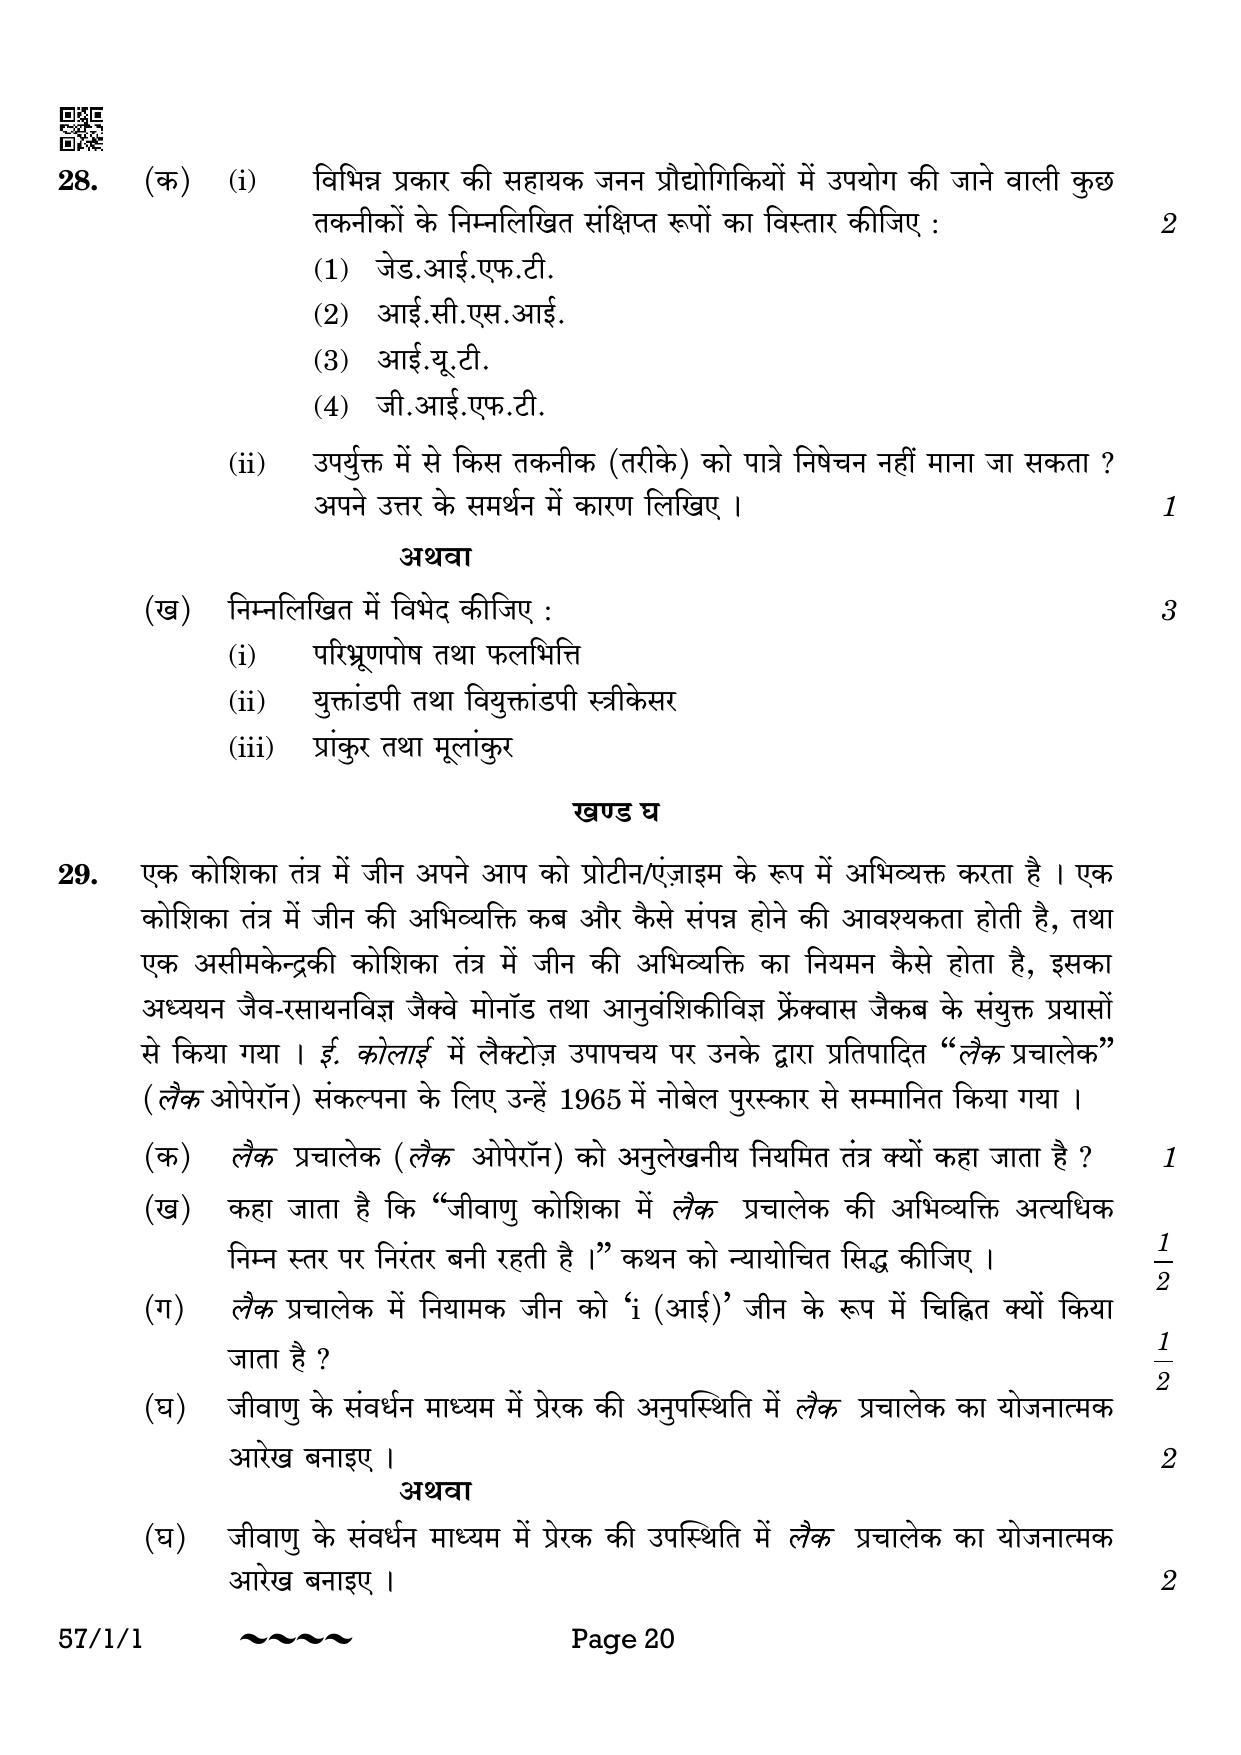 CBSE Class 12 57-1-1 Biology 2023 Question Paper - Page 20